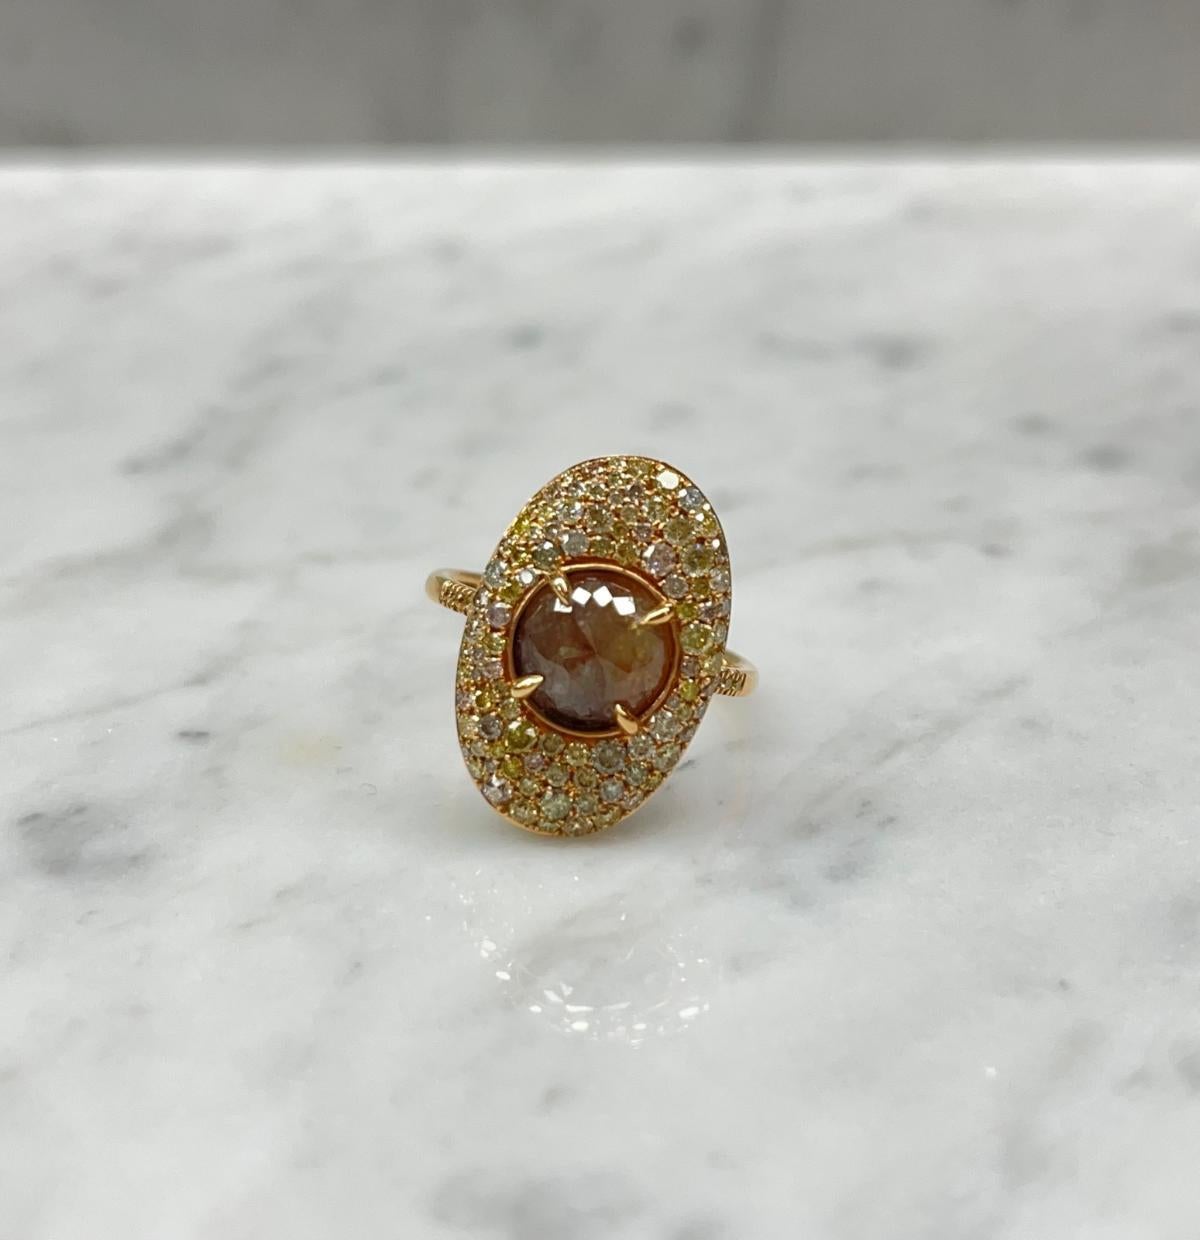 A comfortable cocktail ring! Sits low to the finger. Big but not to big.
Wear on an index finger and wear together with lots of other rings to give a great stacking look